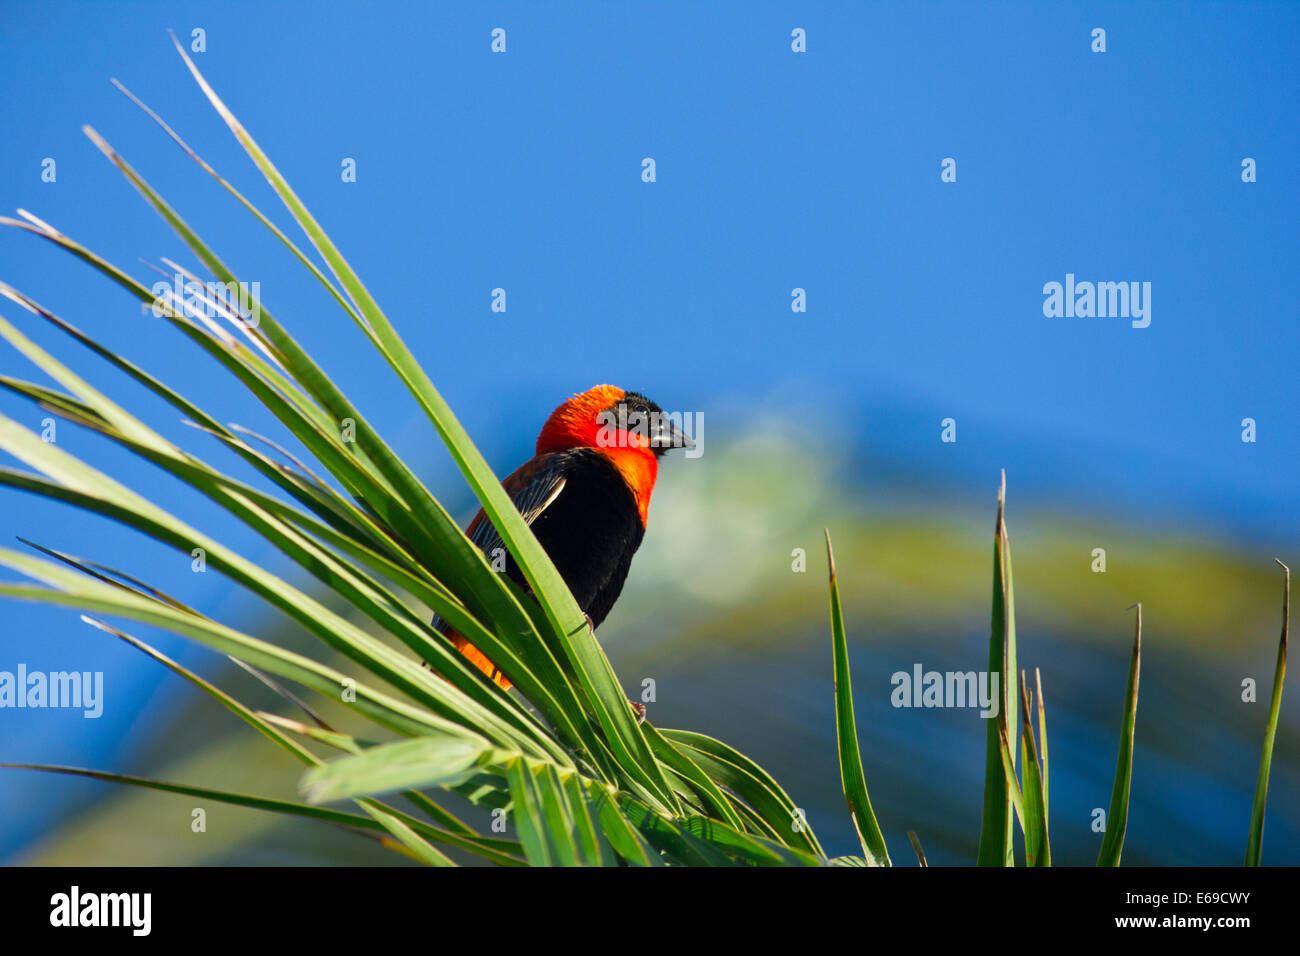 Male southern Red Bishop (Euplectes orix) perched on reeds near wetlands Quissico Mozambique, Africa Stock Photo